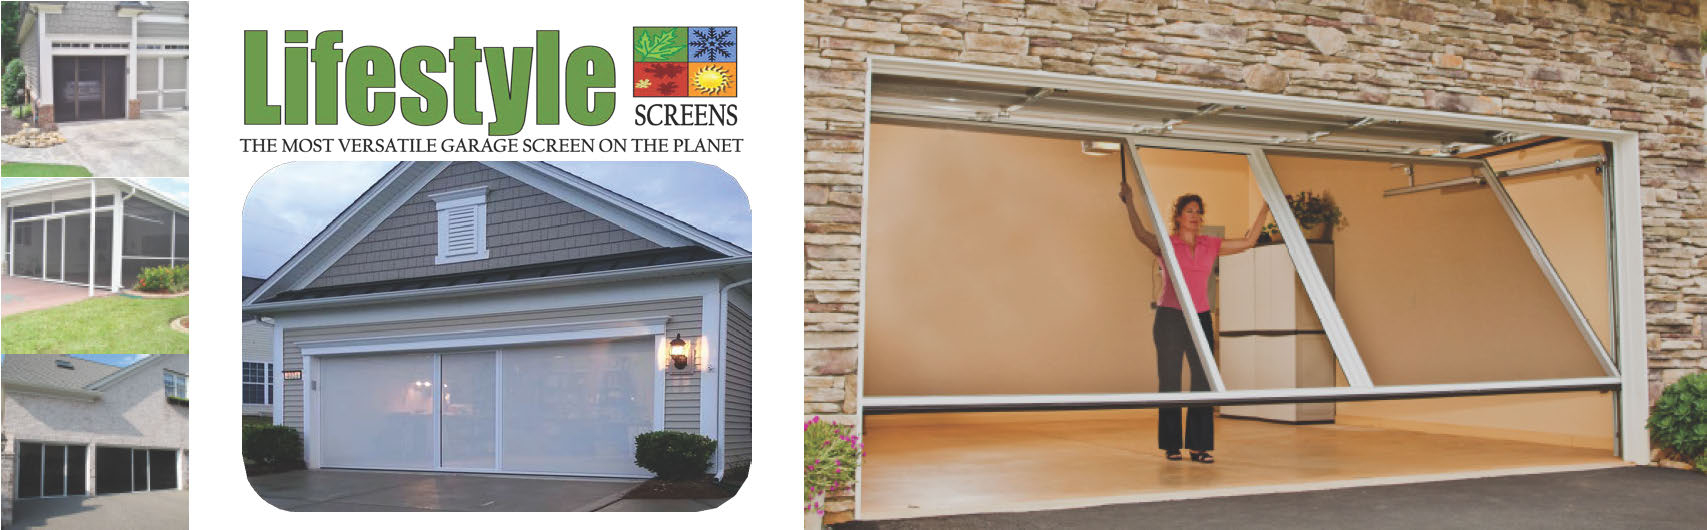 Lifestyle Garage Door Screens intended for dimensions 1707 X 530